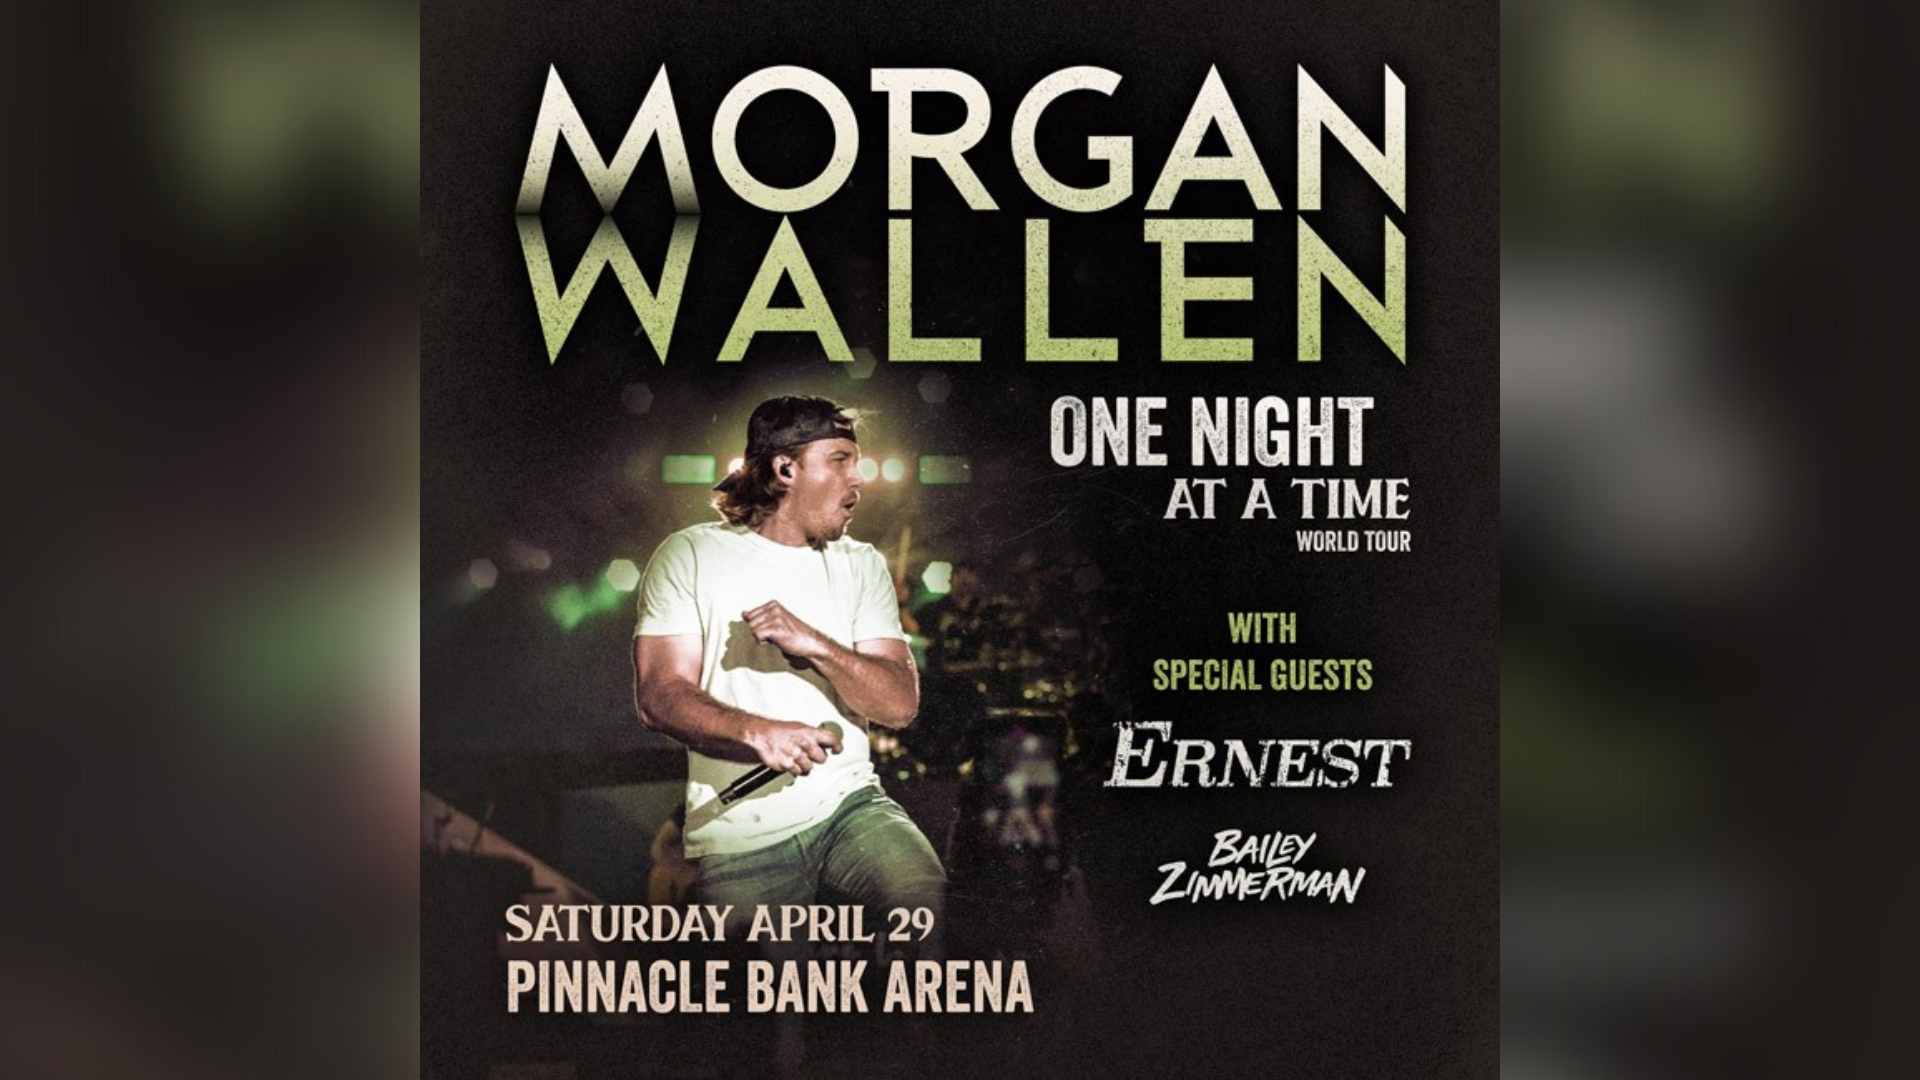 Country star Morgan Wallen coming to Lincoln in 2023